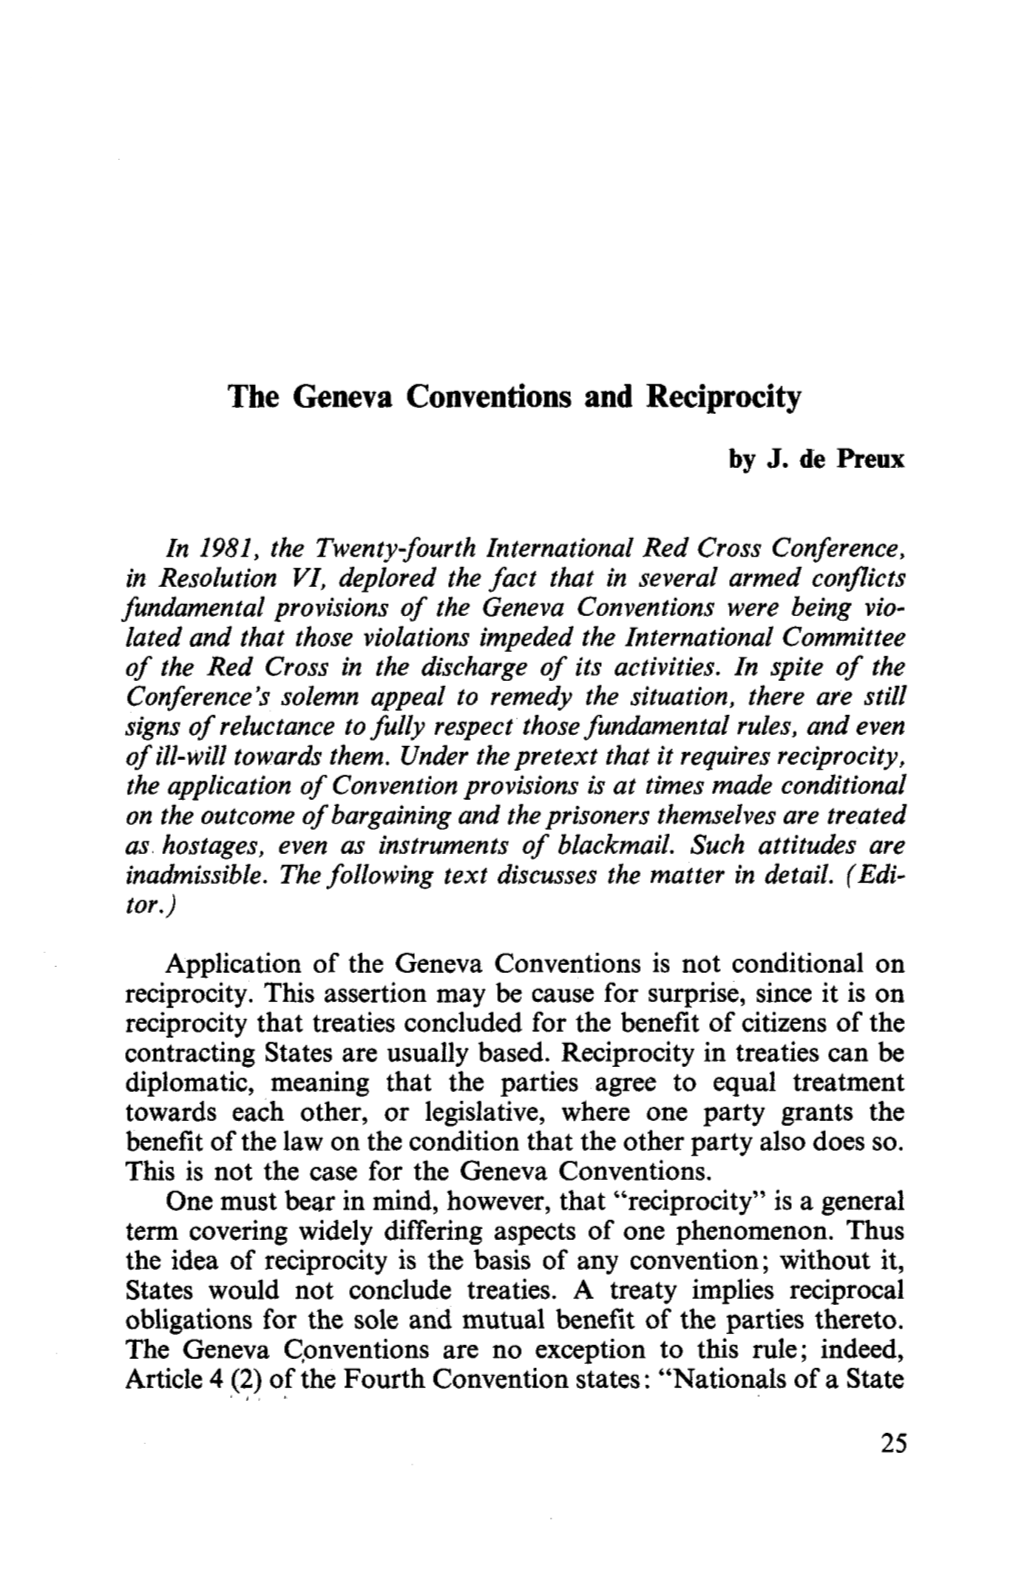 The Geneva Conventions and Reciprocity